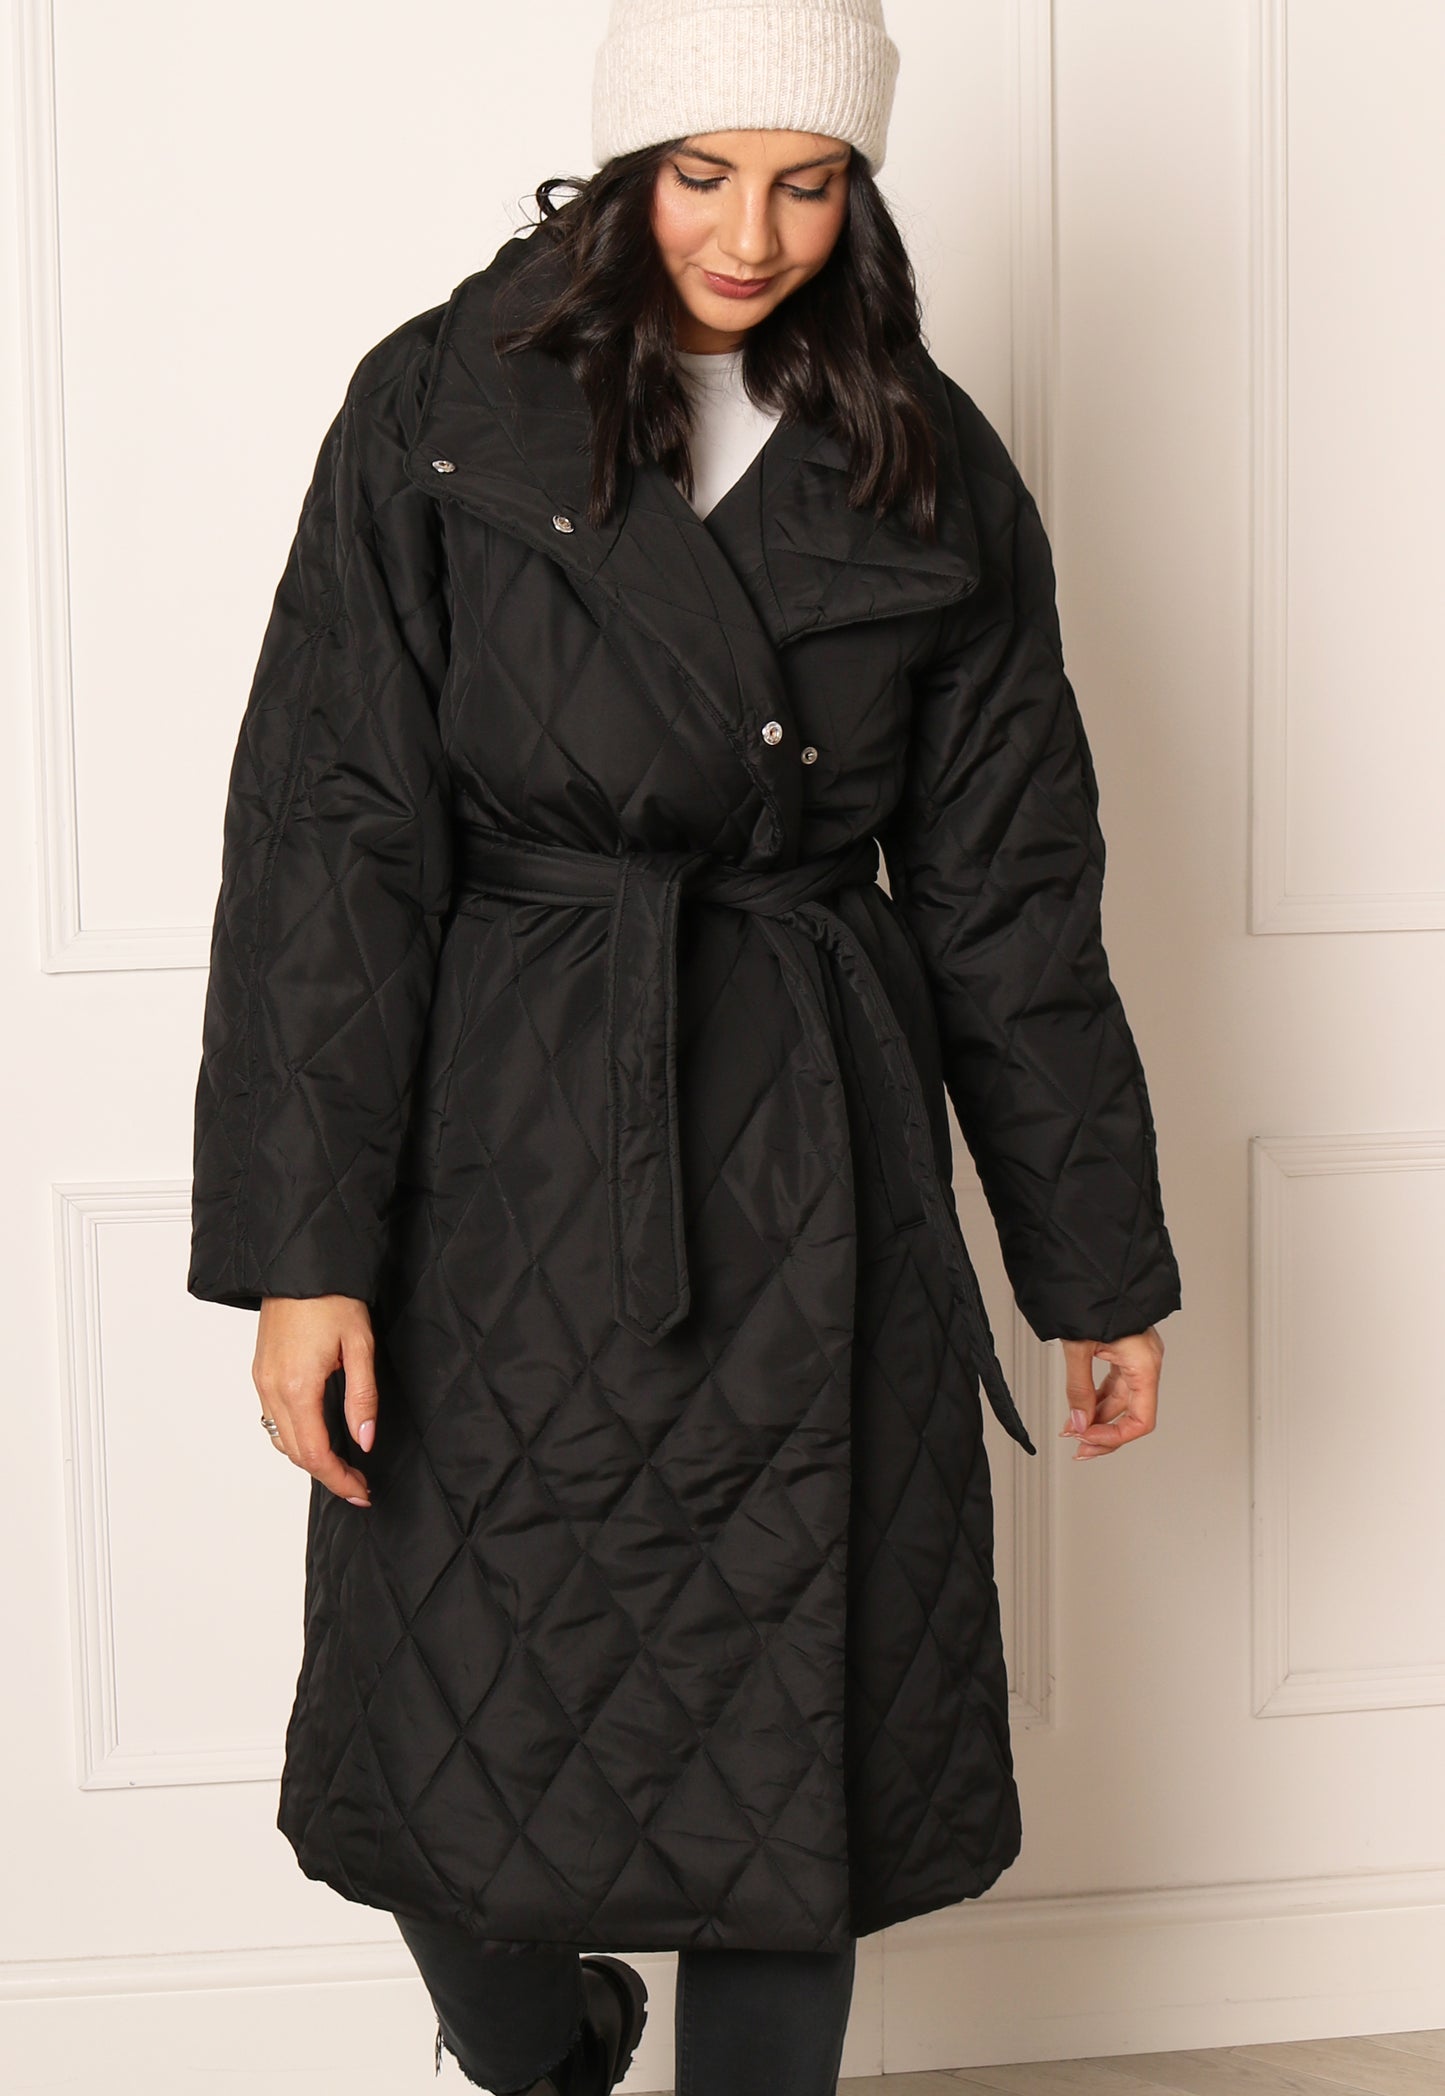 JDY Triton Diamond Quilted Midi Coat with High Neck & Belt in Black - One Nation Clothing